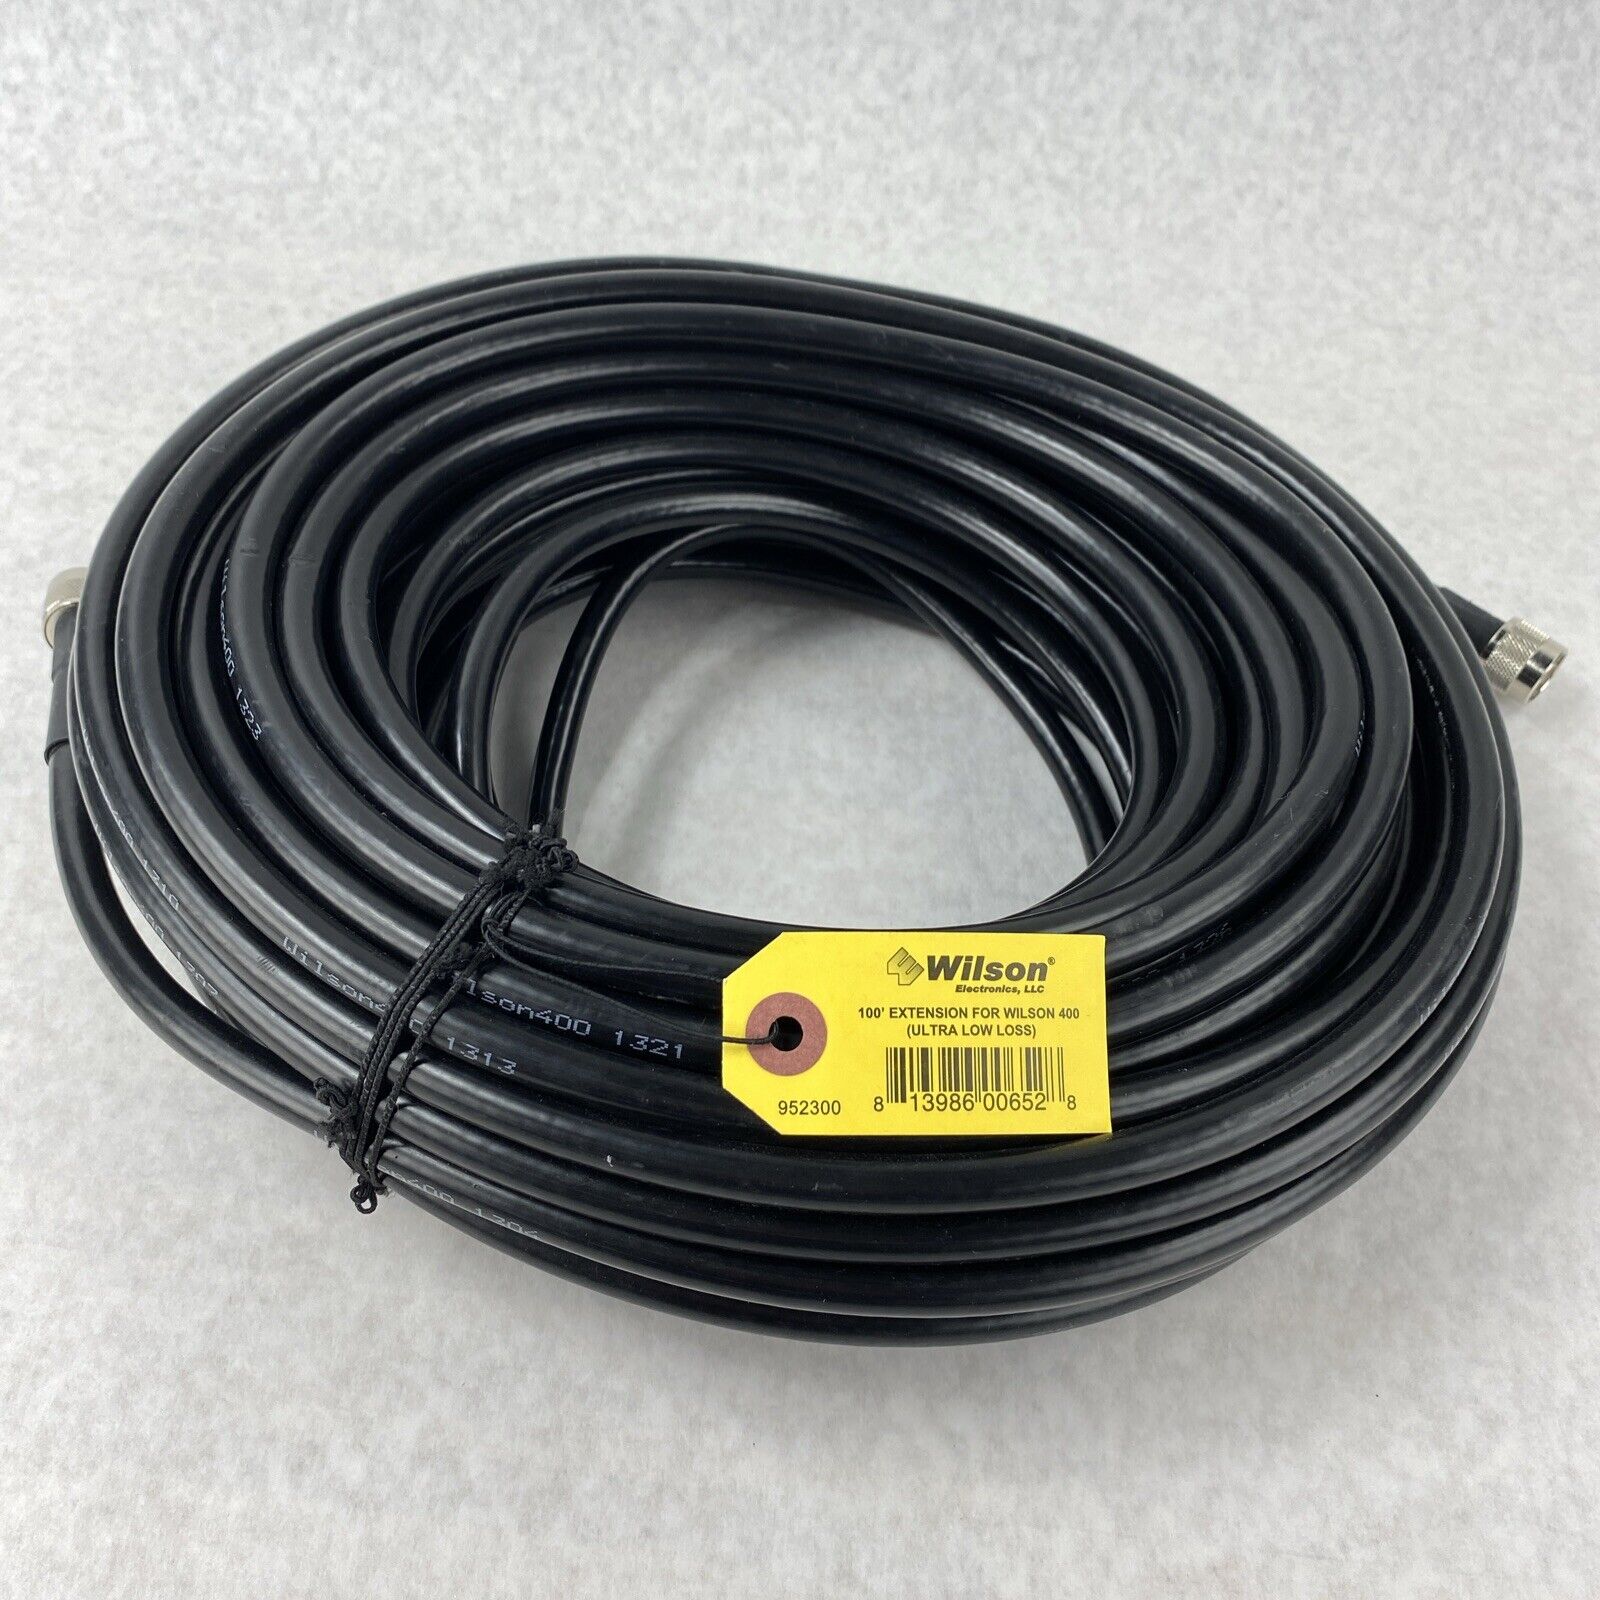 Wilson 952300 100' Extension For Wilson 400  Ultra Low Loss Coaxial Cable N-Male